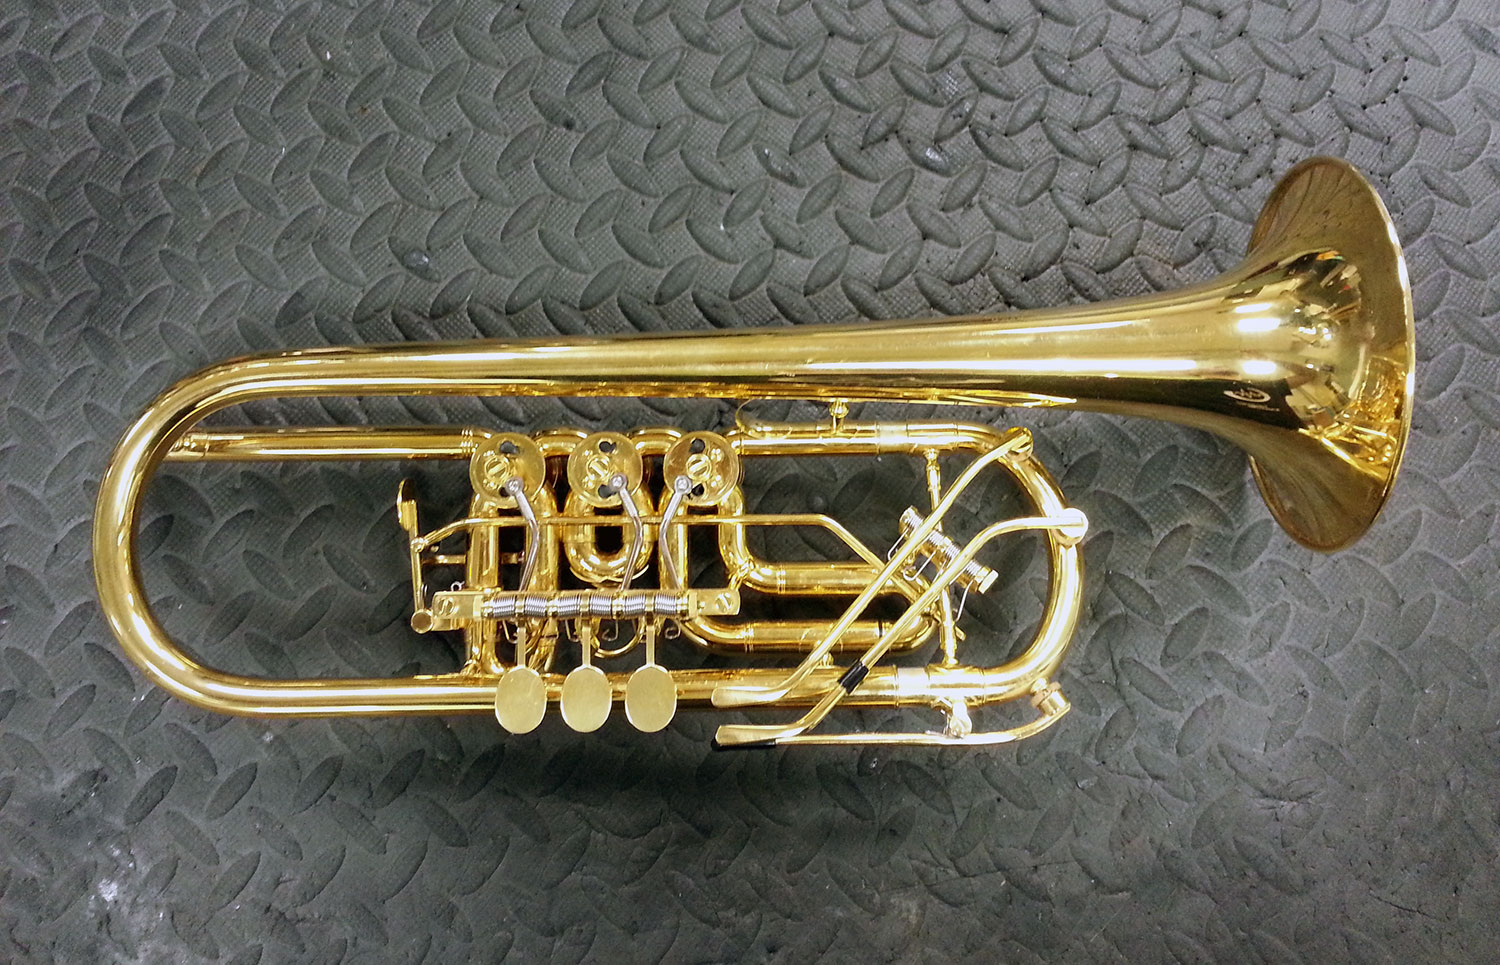 NZSO Schagerl Rotary Trumpets